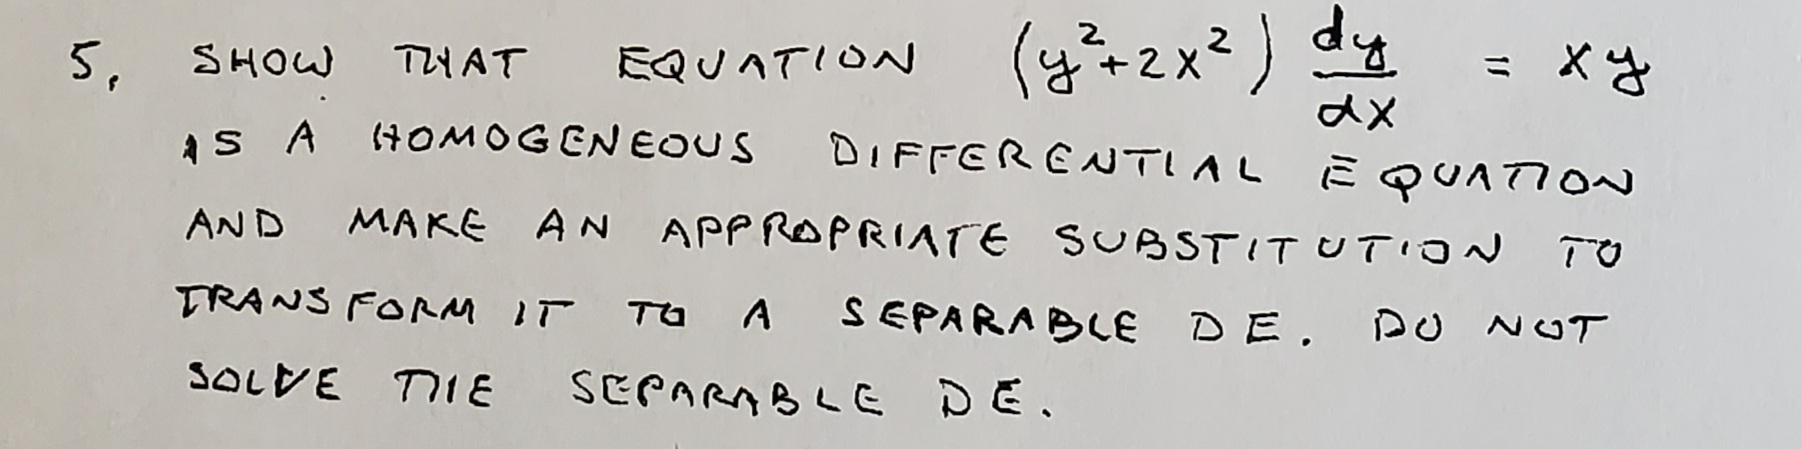 EQUへTION (+2x?)
AS A (40MOGENEOUS DIFFERENTIAL Ē QUATION
SHOW
TYAT
AND MAKE AN APPROPRIATE SUBSTITUTION TO
TRANS FORM IT TO A
S EPARABLE DE. DU NOT
SOLVE TIE
SEPARABLE DE.
